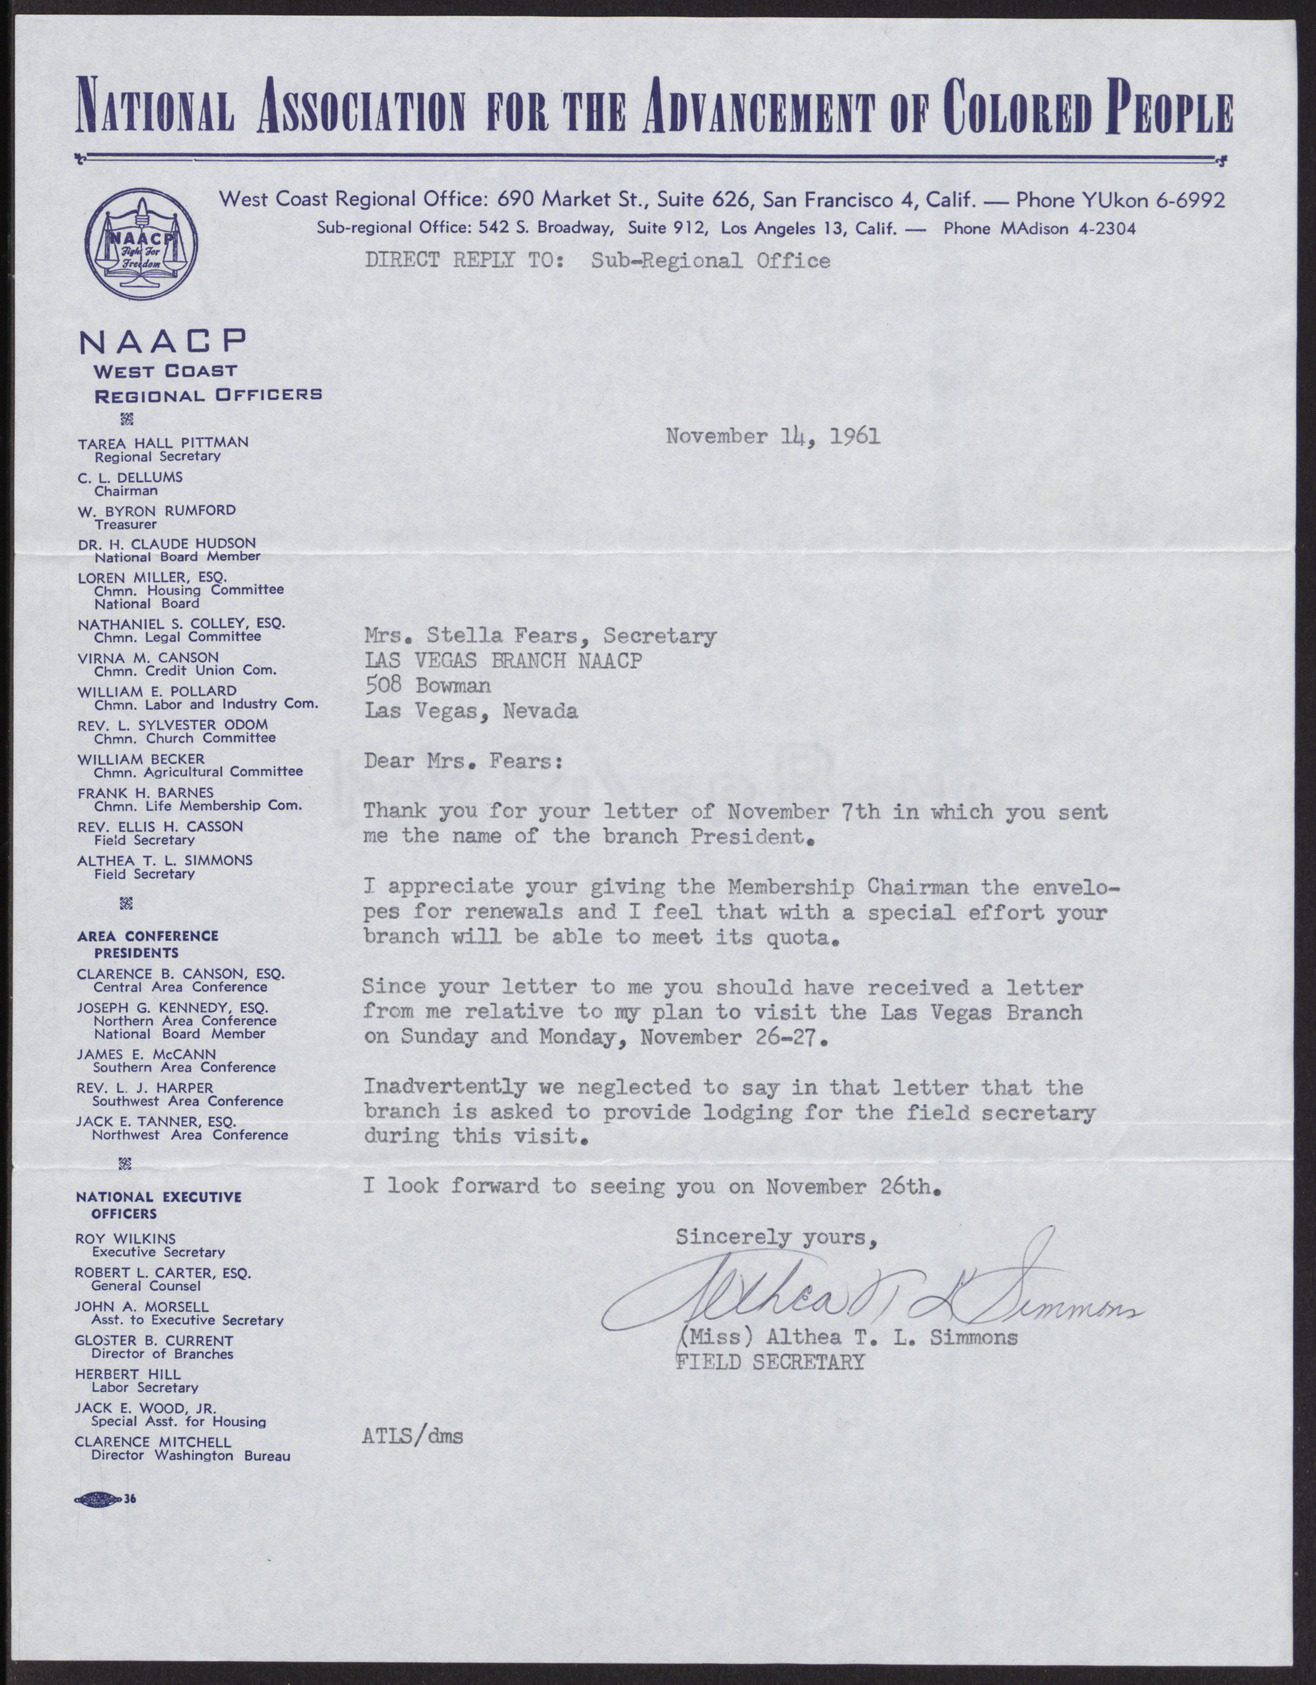 Letter to Mrs. Stella Fears from Althea T. L. Simmons, November 14, 1961